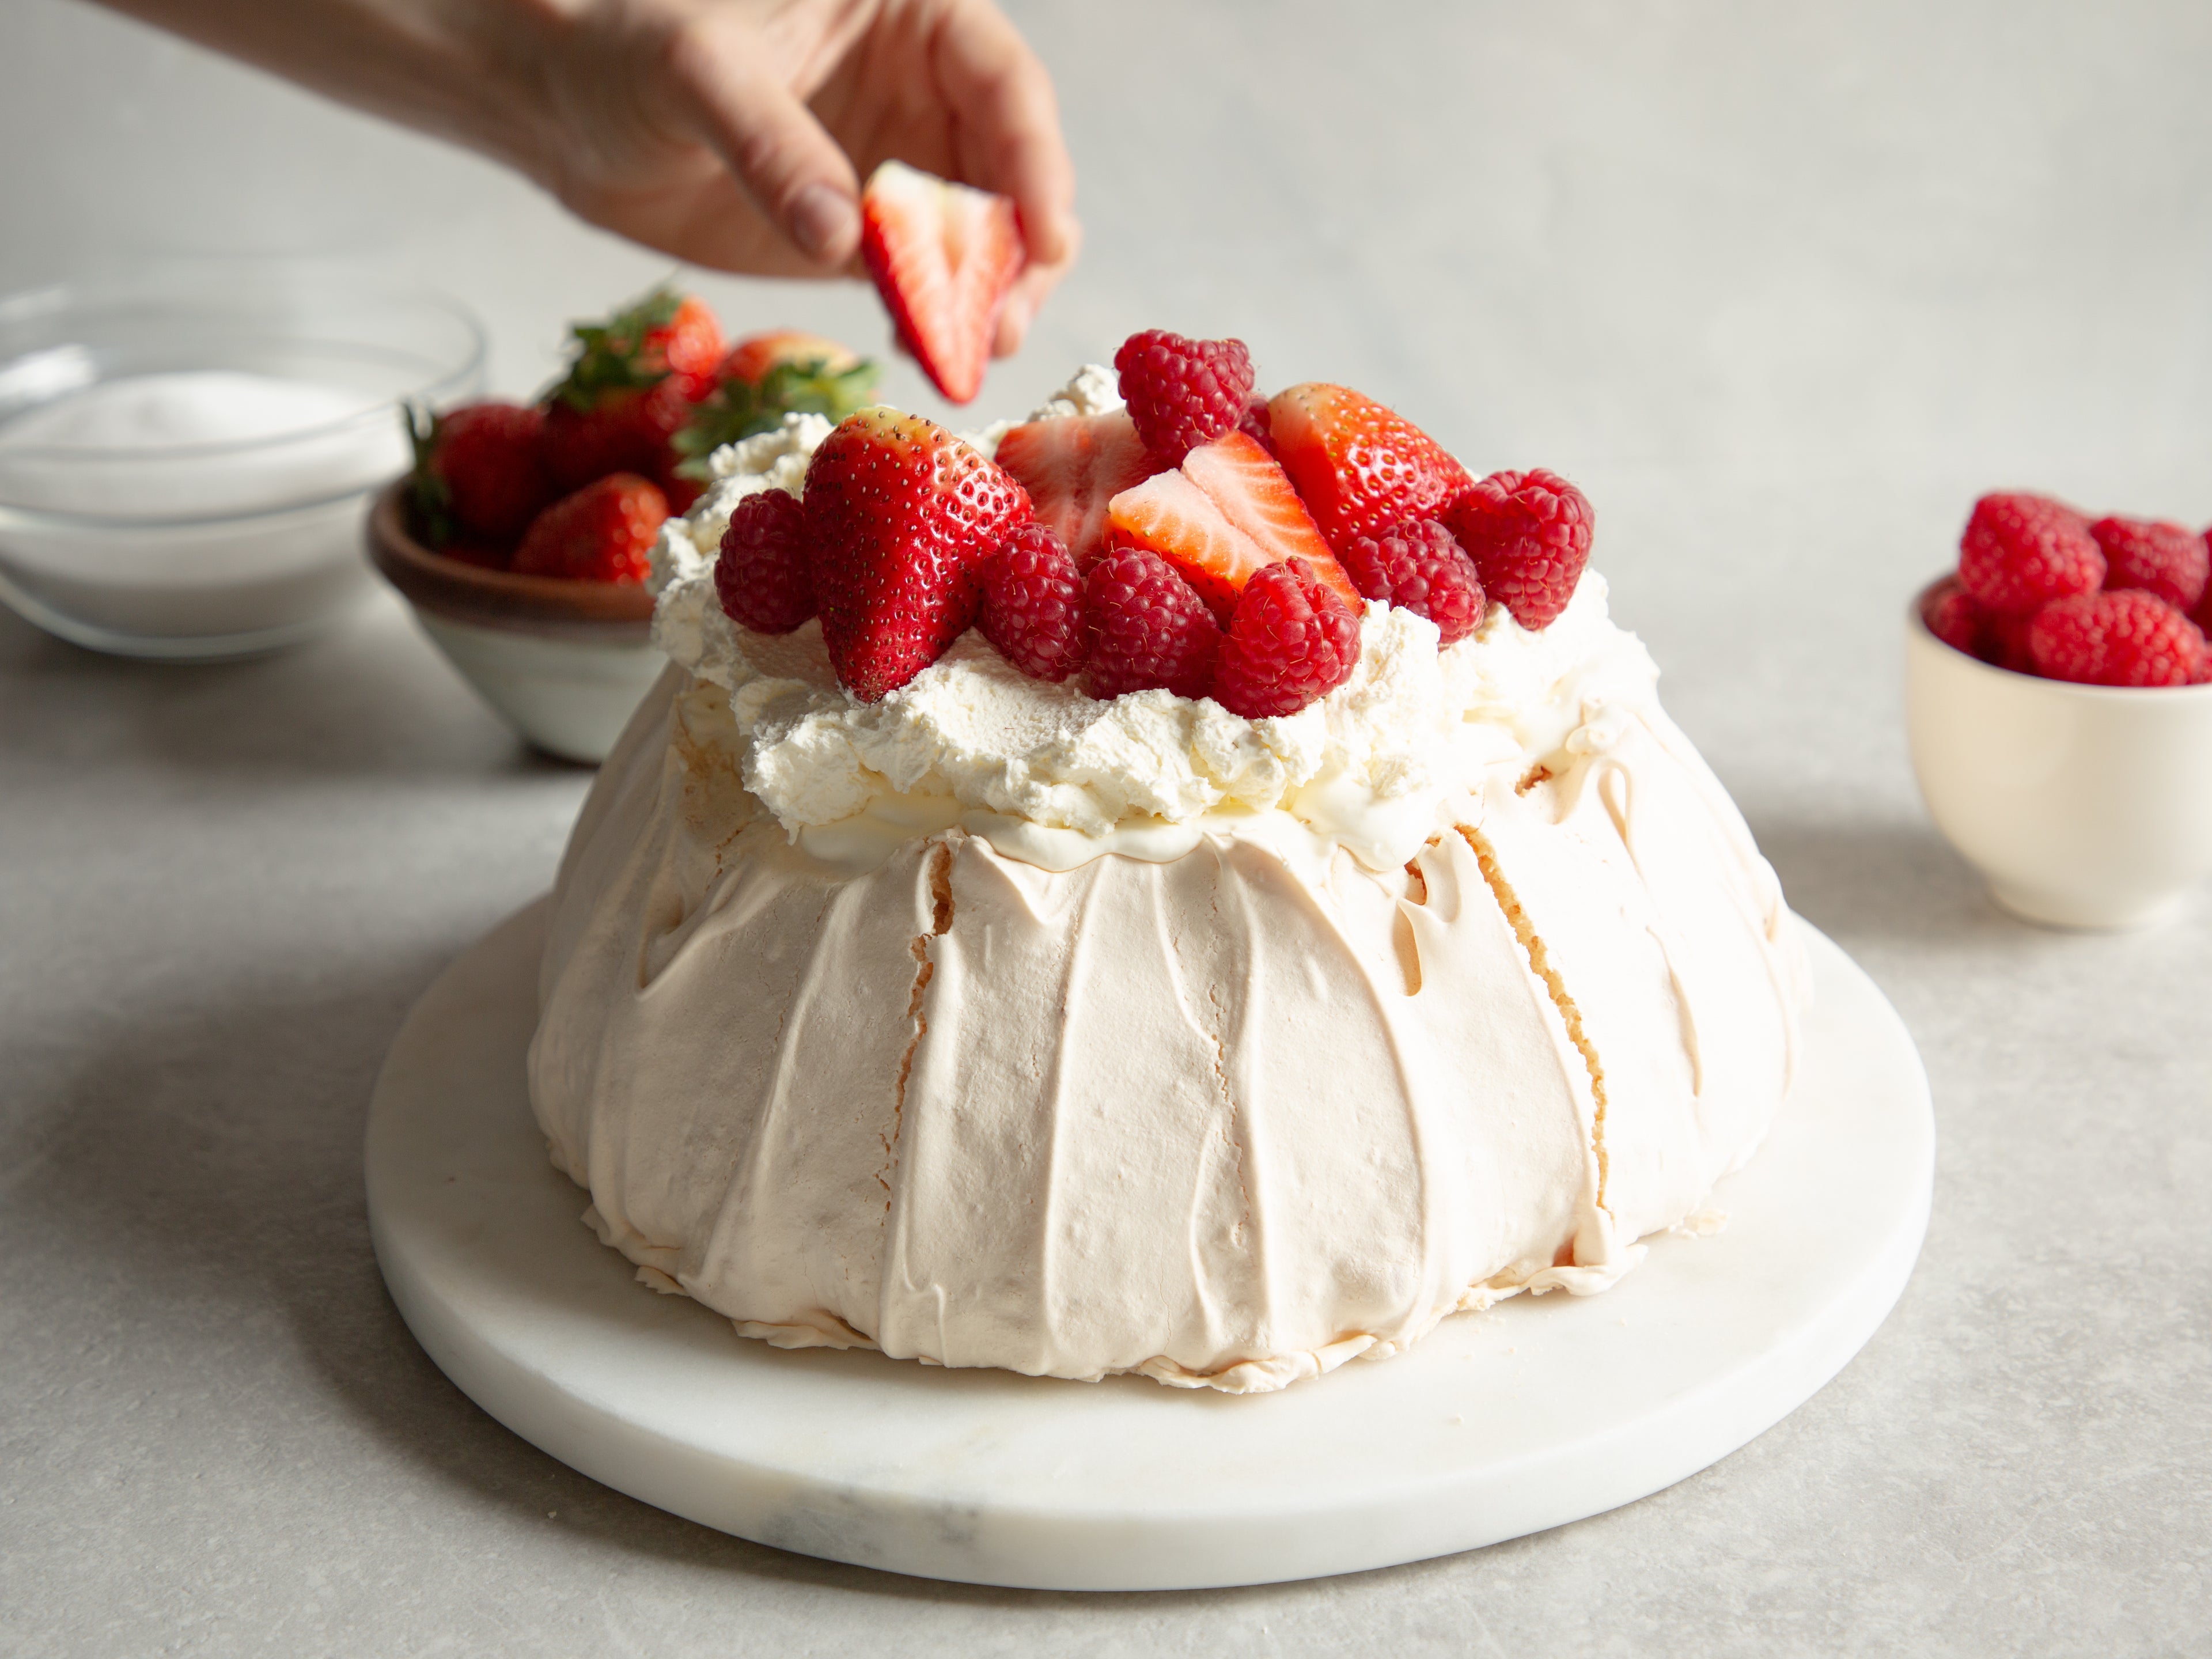 Strawberry Pavlova being hand decorated with fresh strawberries and raspberries on a layer of whipped cream